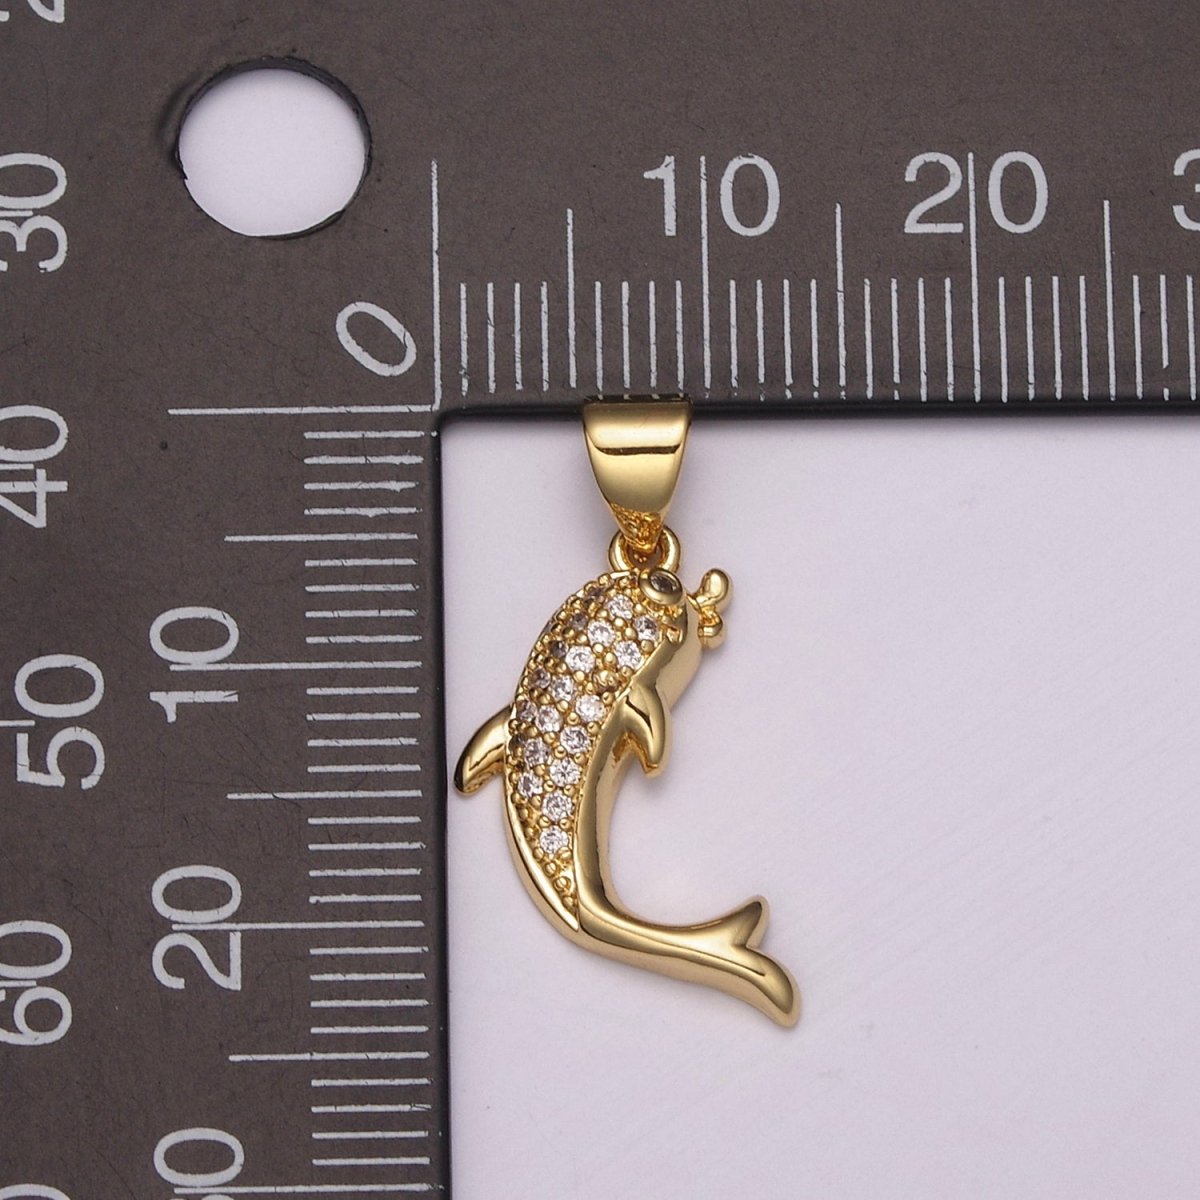 Dolphin Charm Necklace Micro Pave Dolphin Pendant Ocean Under the Sea Inspired Silver Pendant N-491 N-492 - DLUXCA